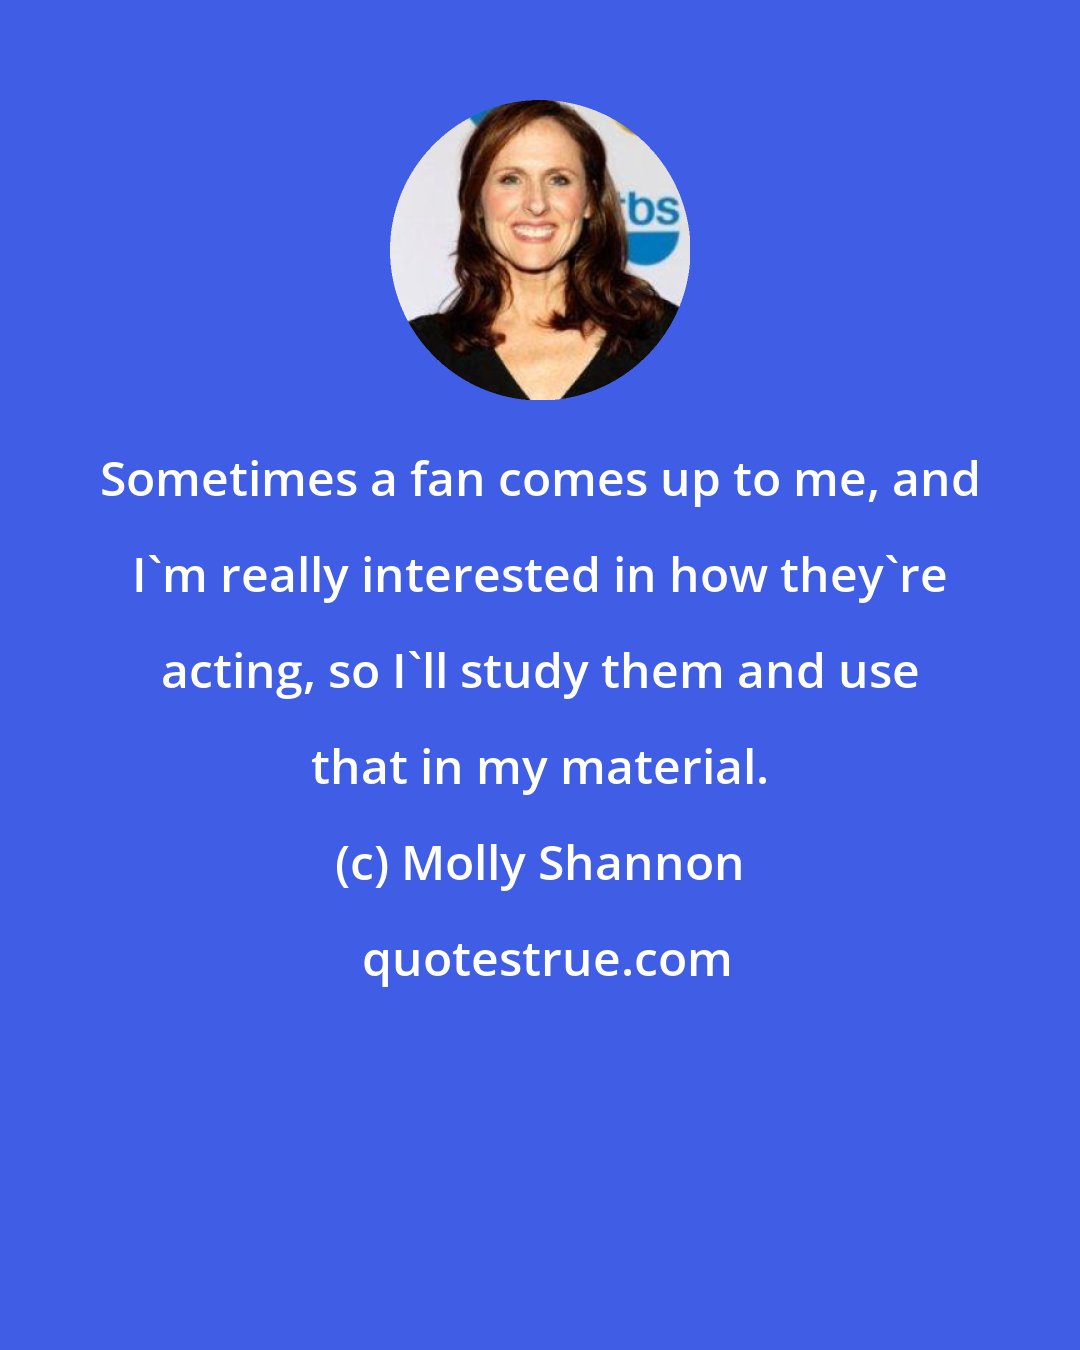 Molly Shannon: Sometimes a fan comes up to me, and I'm really interested in how they're acting, so I'll study them and use that in my material.